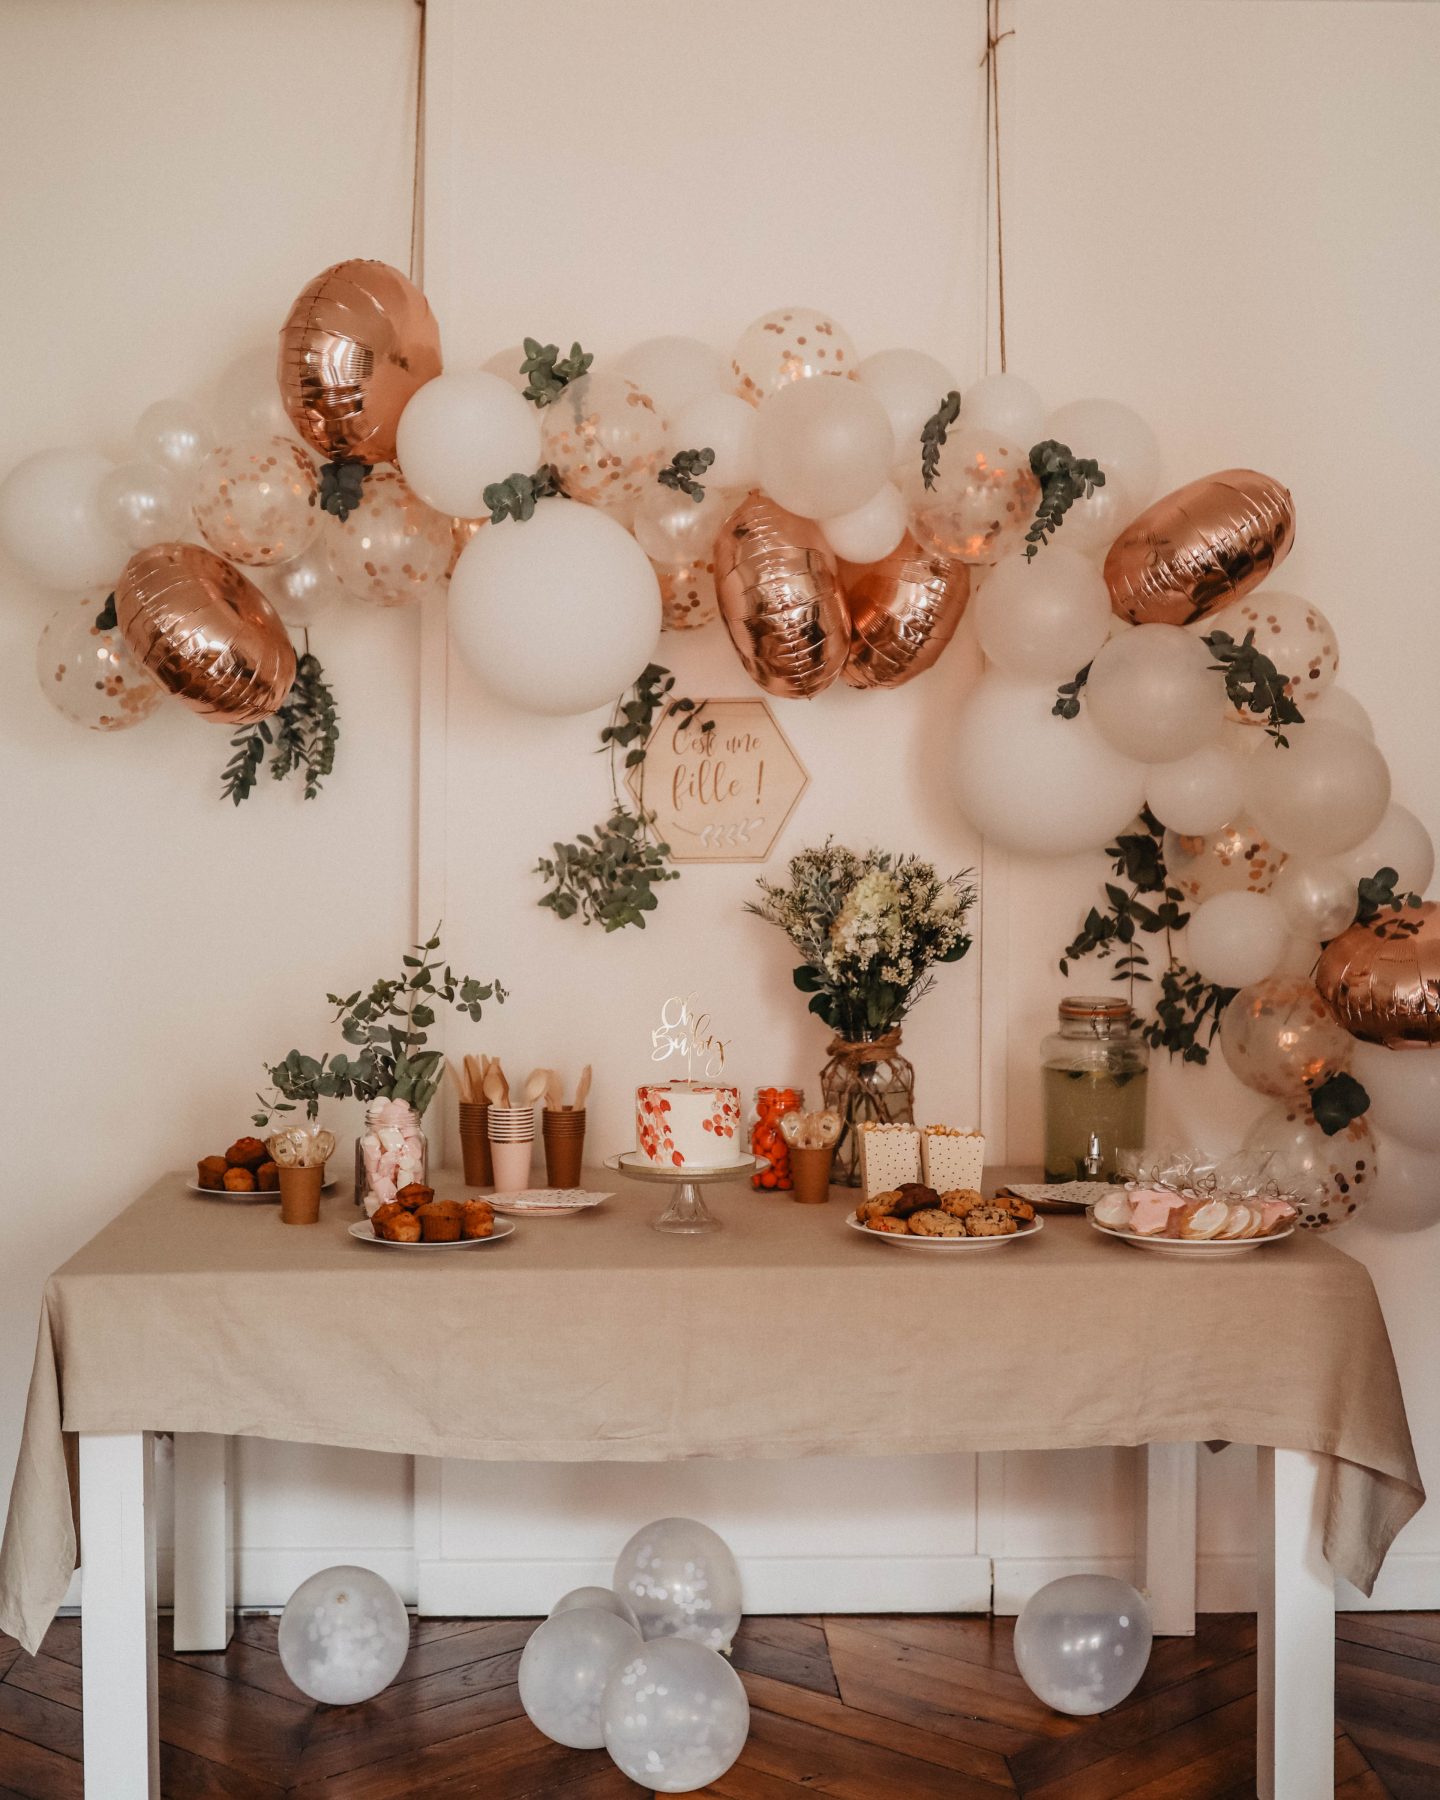 Baby Shower - Deco & food - Marie and Mood - Blog mode lifestyle